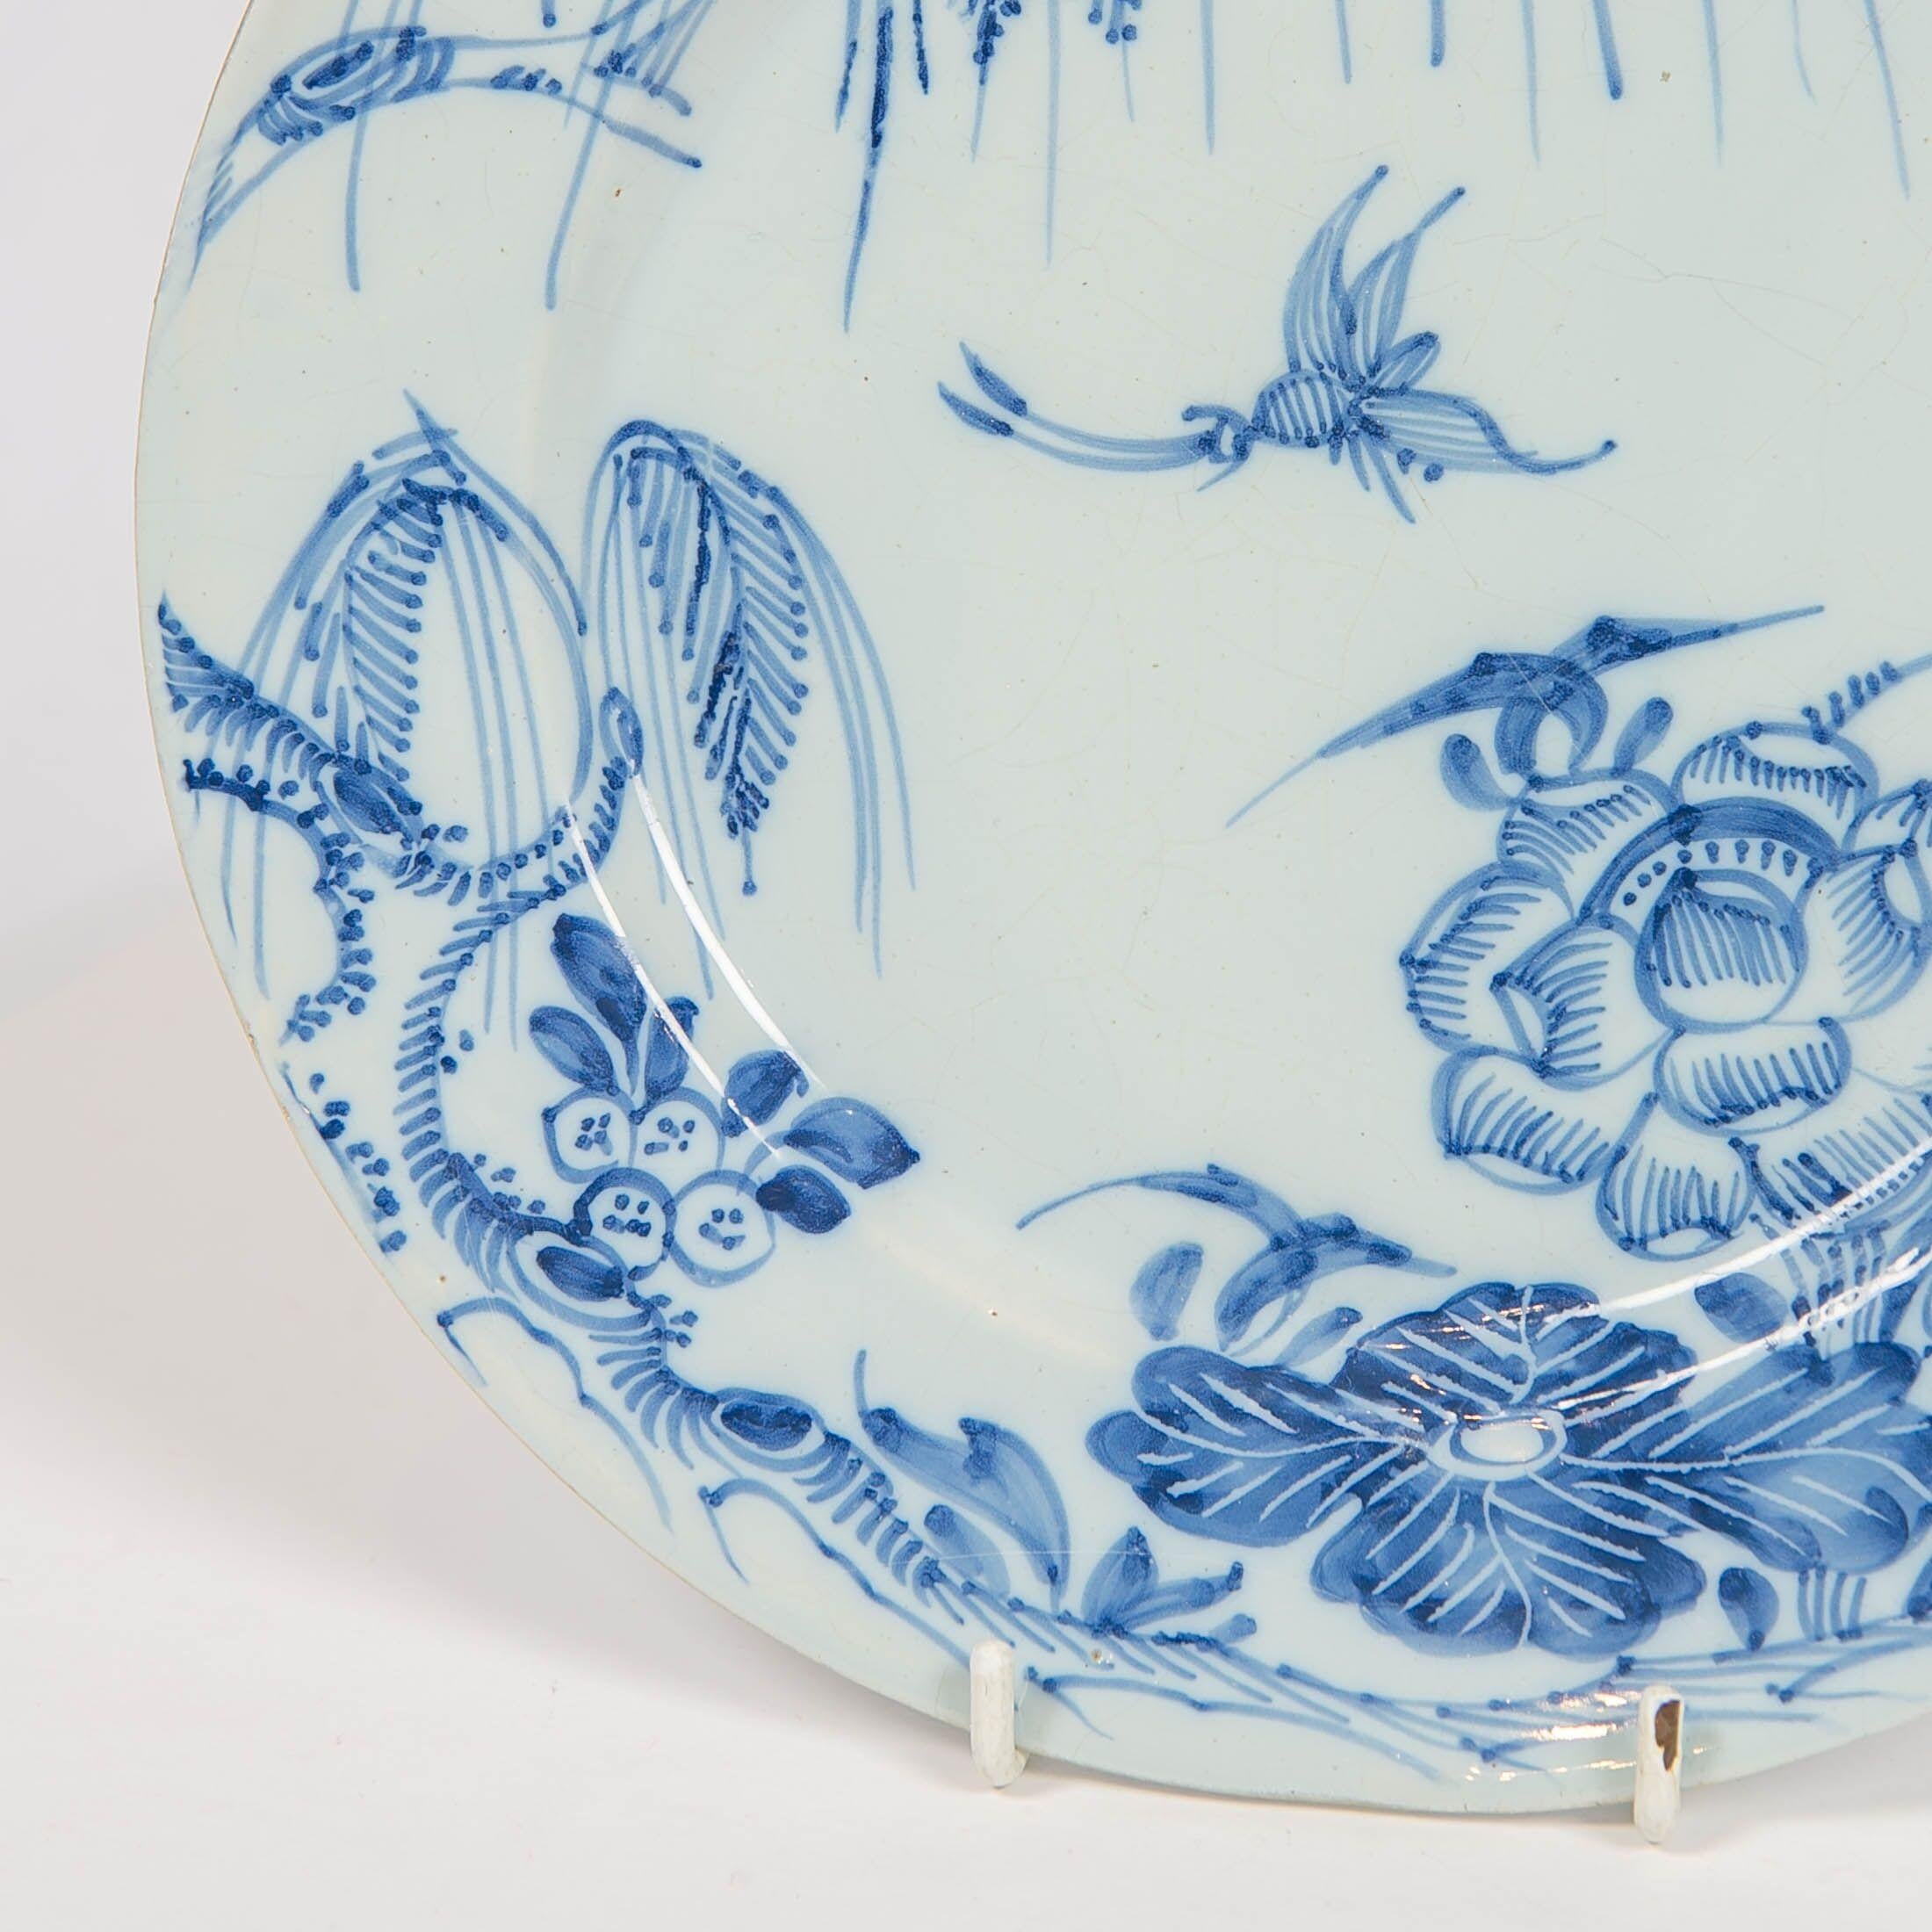  Pair Blue and White Delft Plates 18th Century, Made circa 1750 im Zustand „Hervorragend“ in Katonah, NY